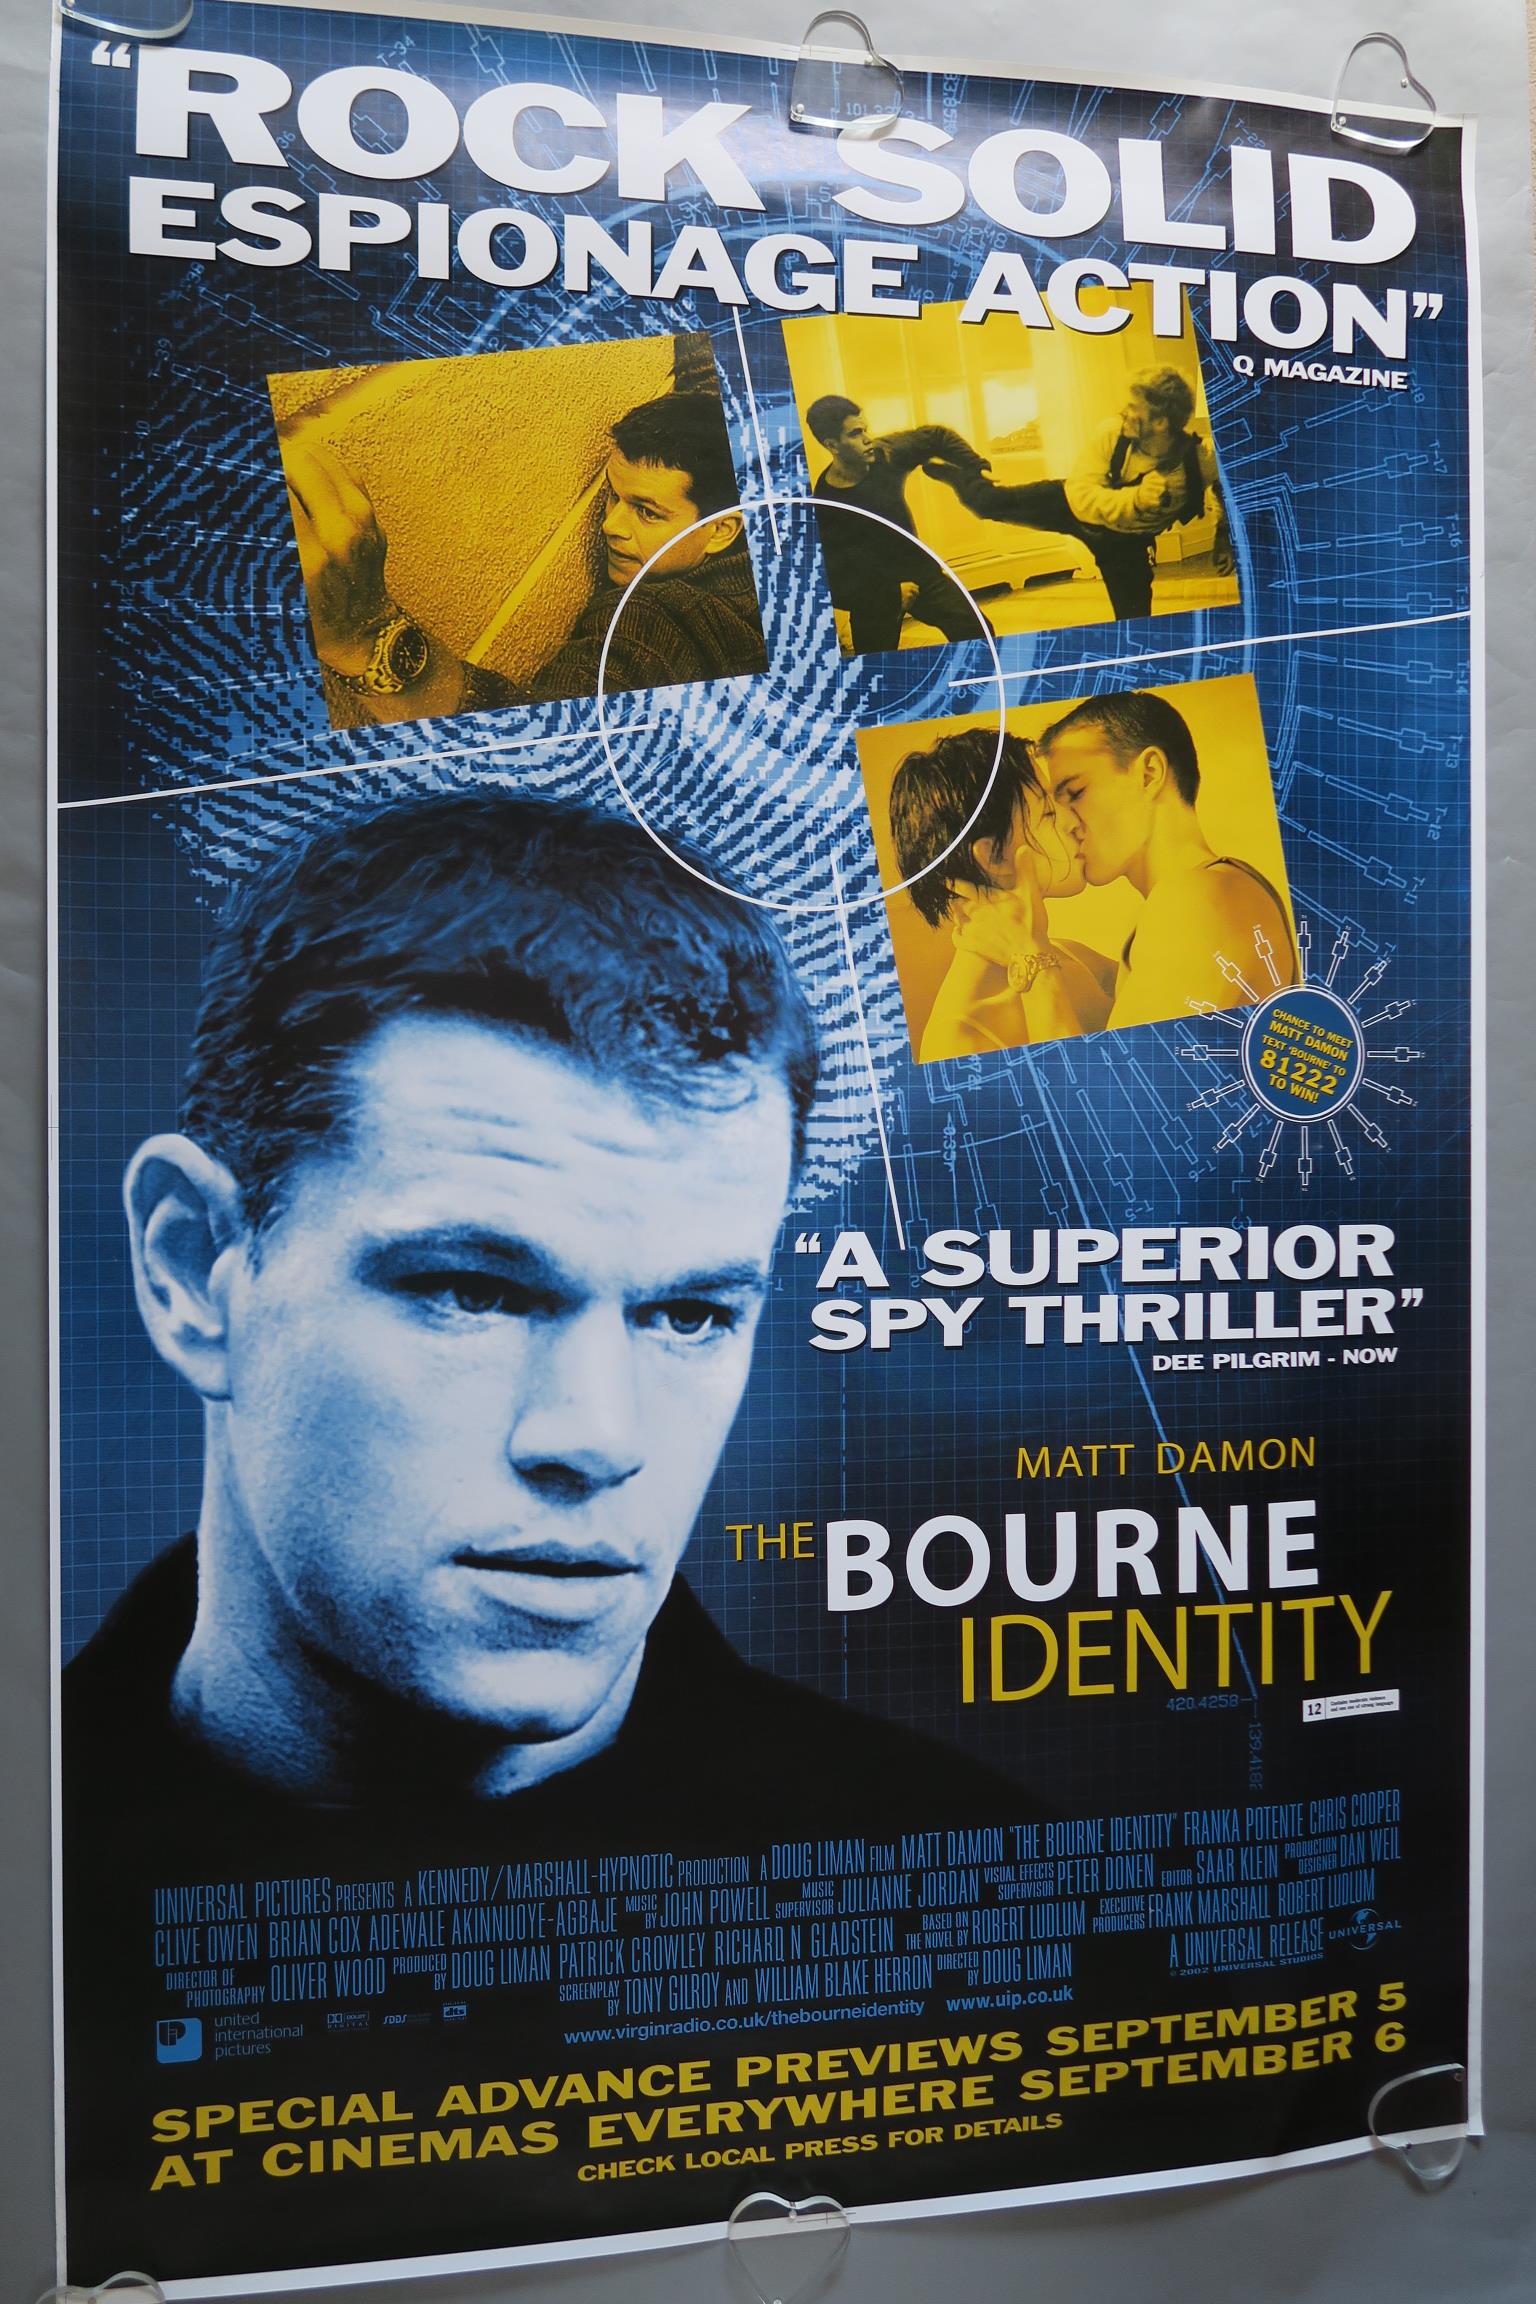 Rolled large posters including The Bourne Identity starring Matt Damon in Excellent rolled